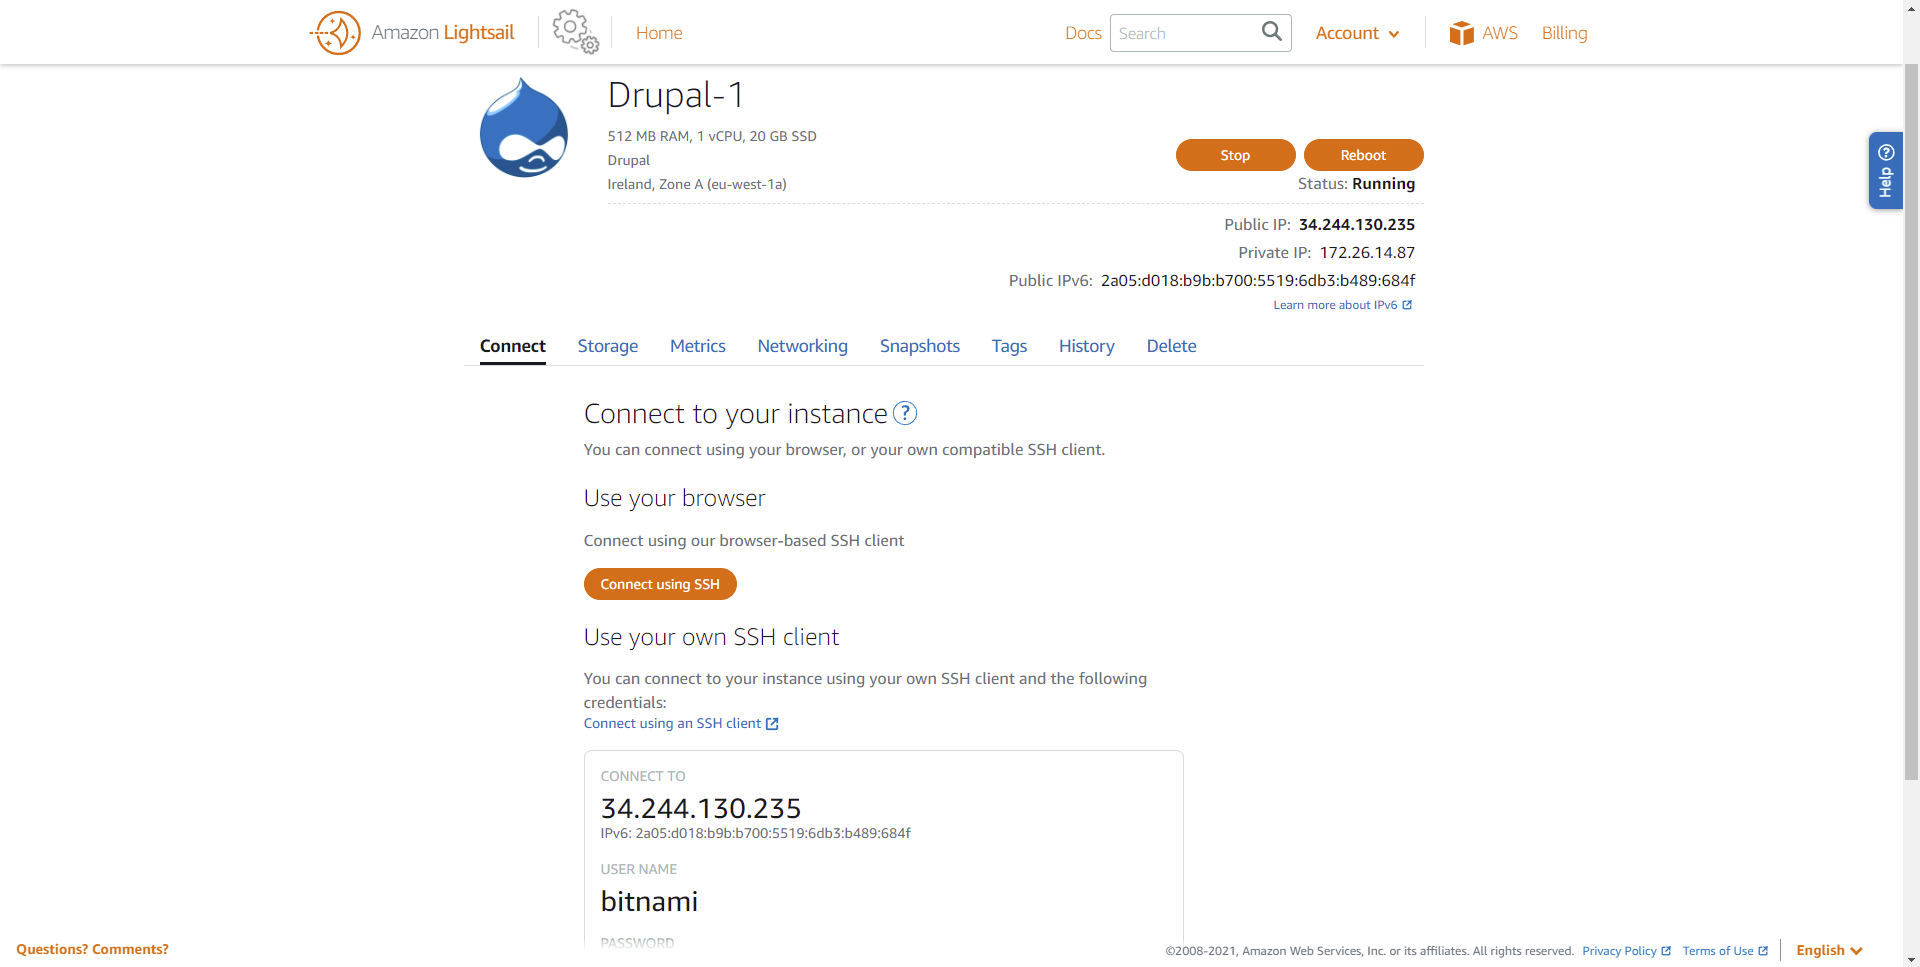 The screen after installing Drupal on the Amazon Lightsail platform with the Connect using SSH button visible